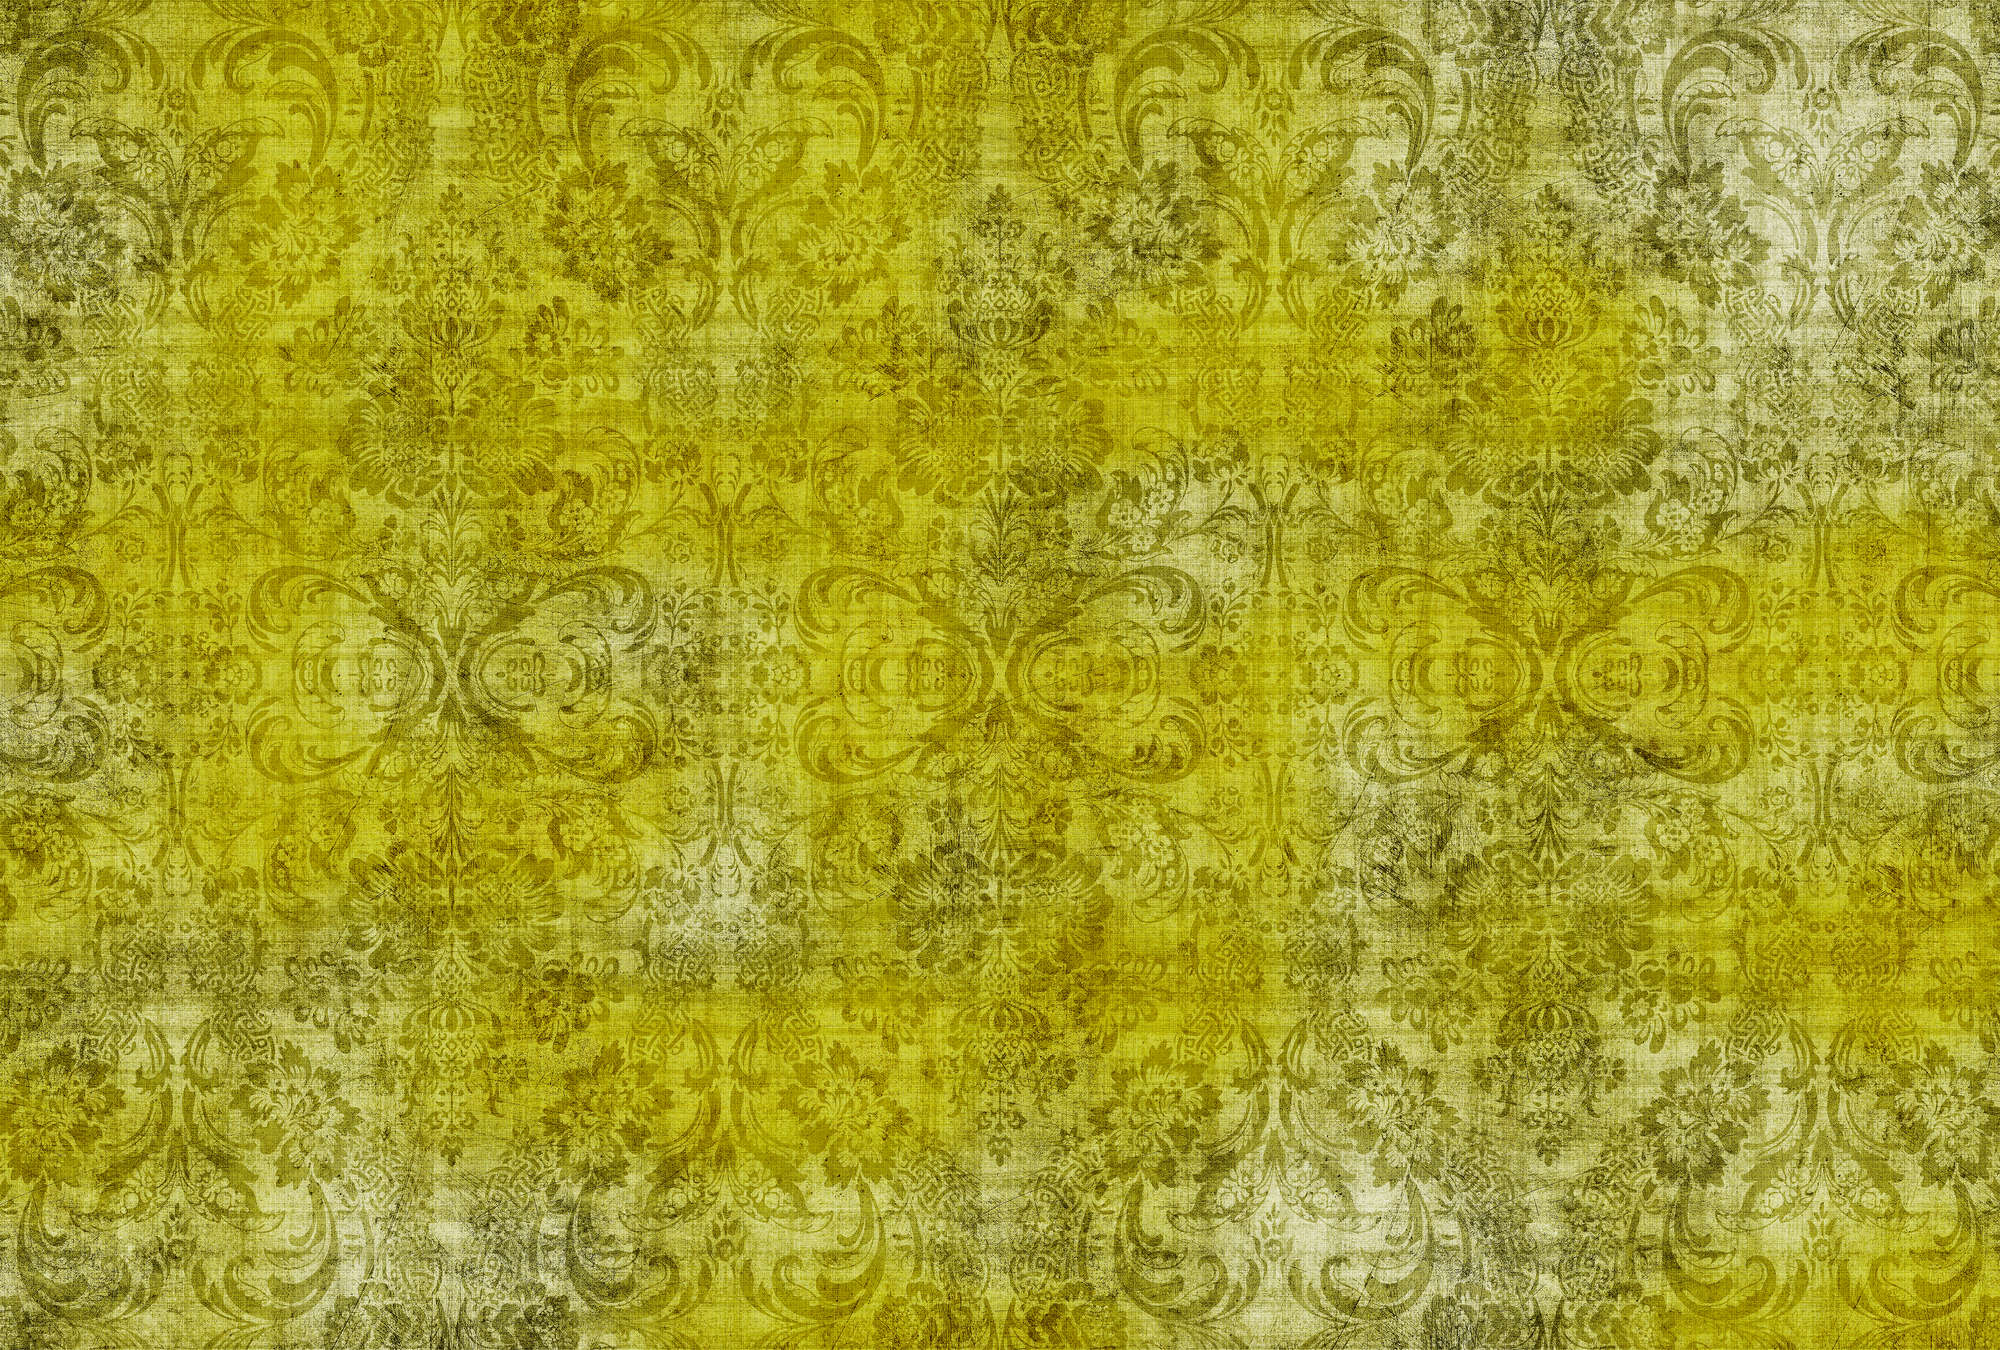             Old damask 1 - Ornaments on yellow-mottled photo wallpaper in natural linen structure - Yellow | Matt smooth non-woven
        